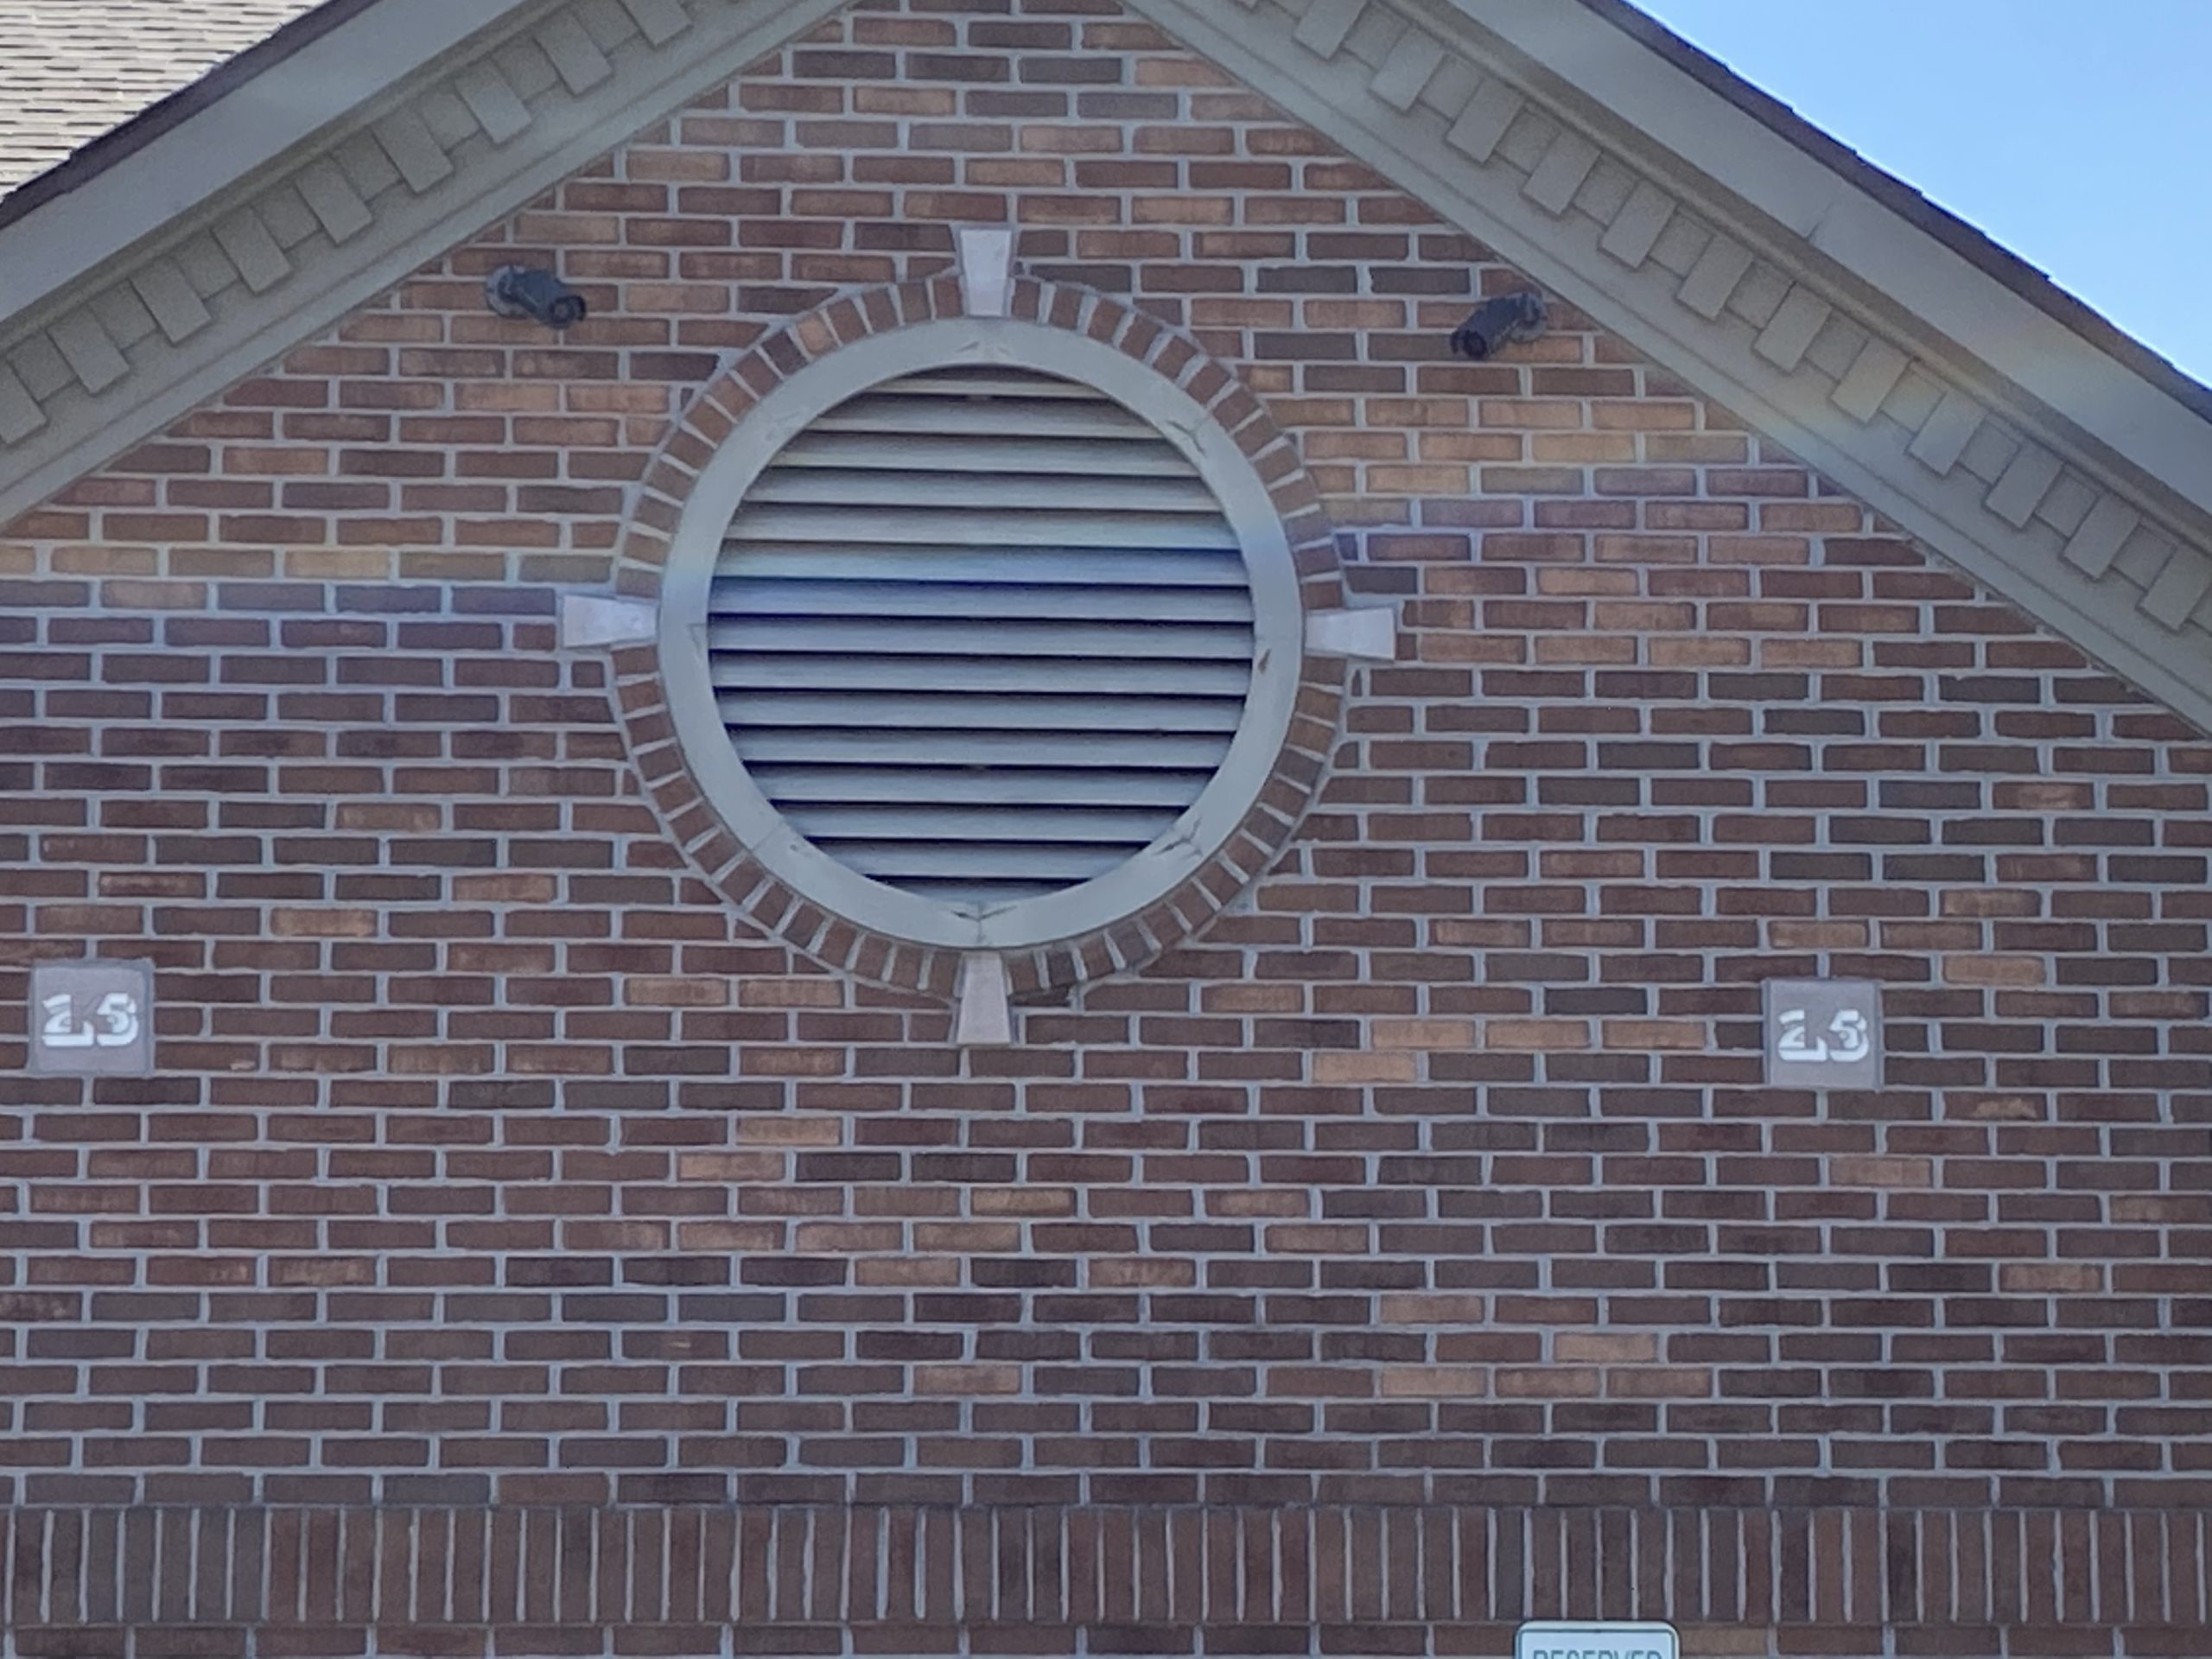 This is a circular gable vent on a brick building.